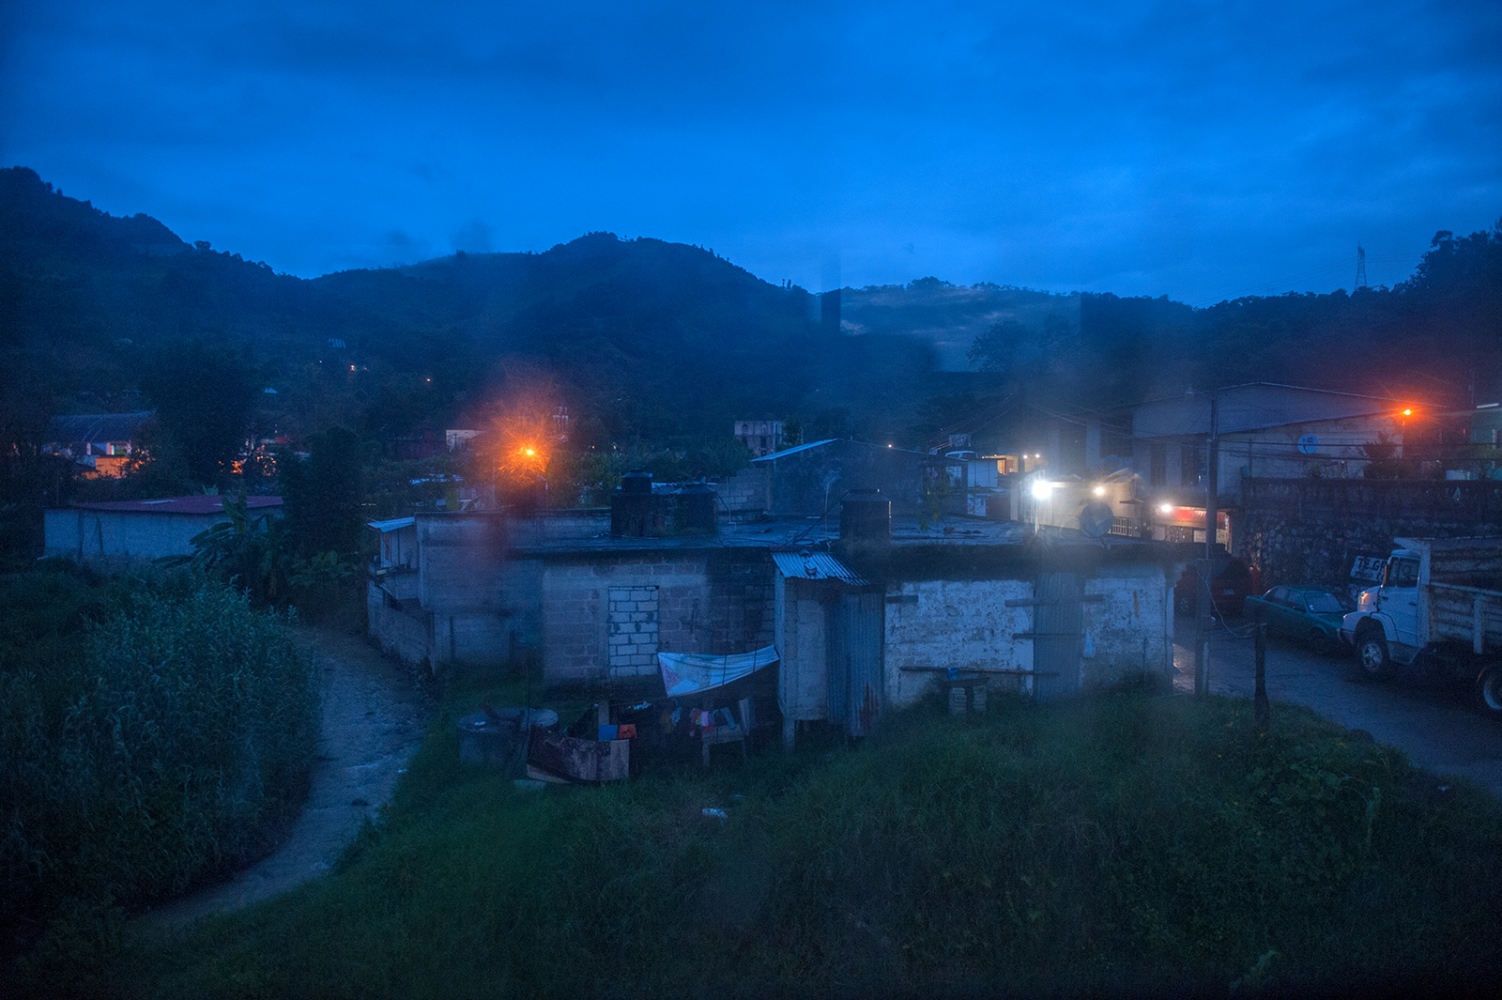  Sierra Norte, Mexico. The small village of Tlaola, a thousand souls in the forest 